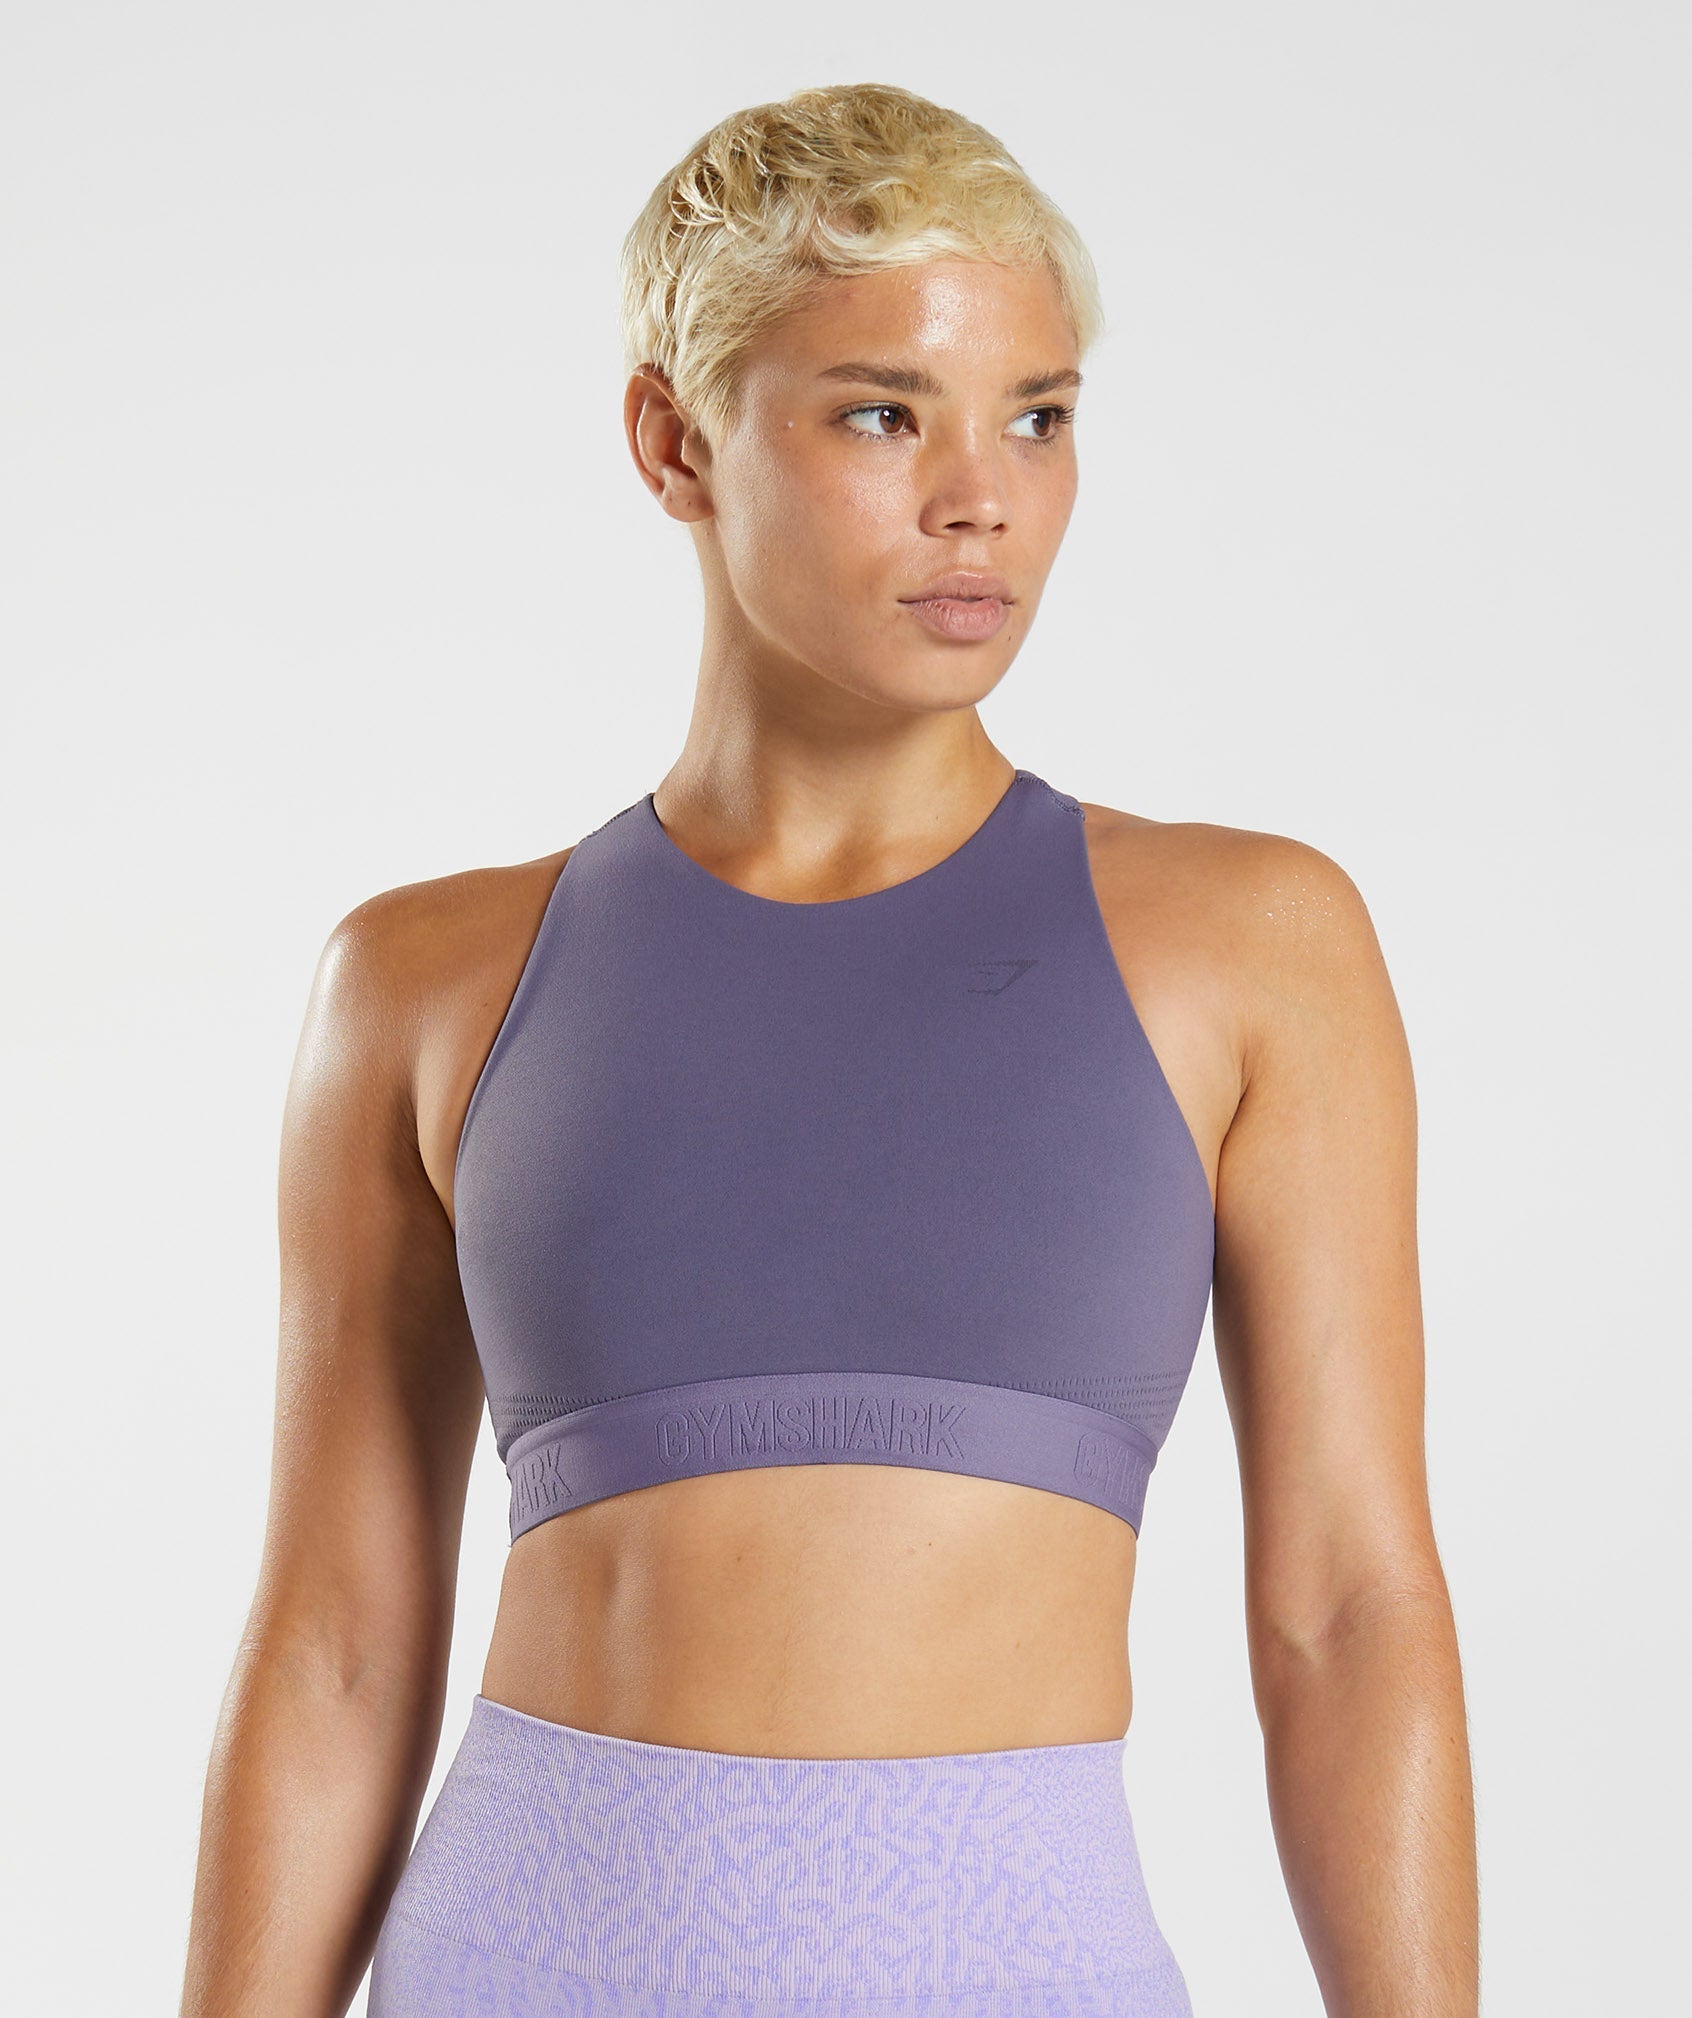 Gymshark Prism Color Block Sports Bra in Rich Purple Soft Lilac Small S